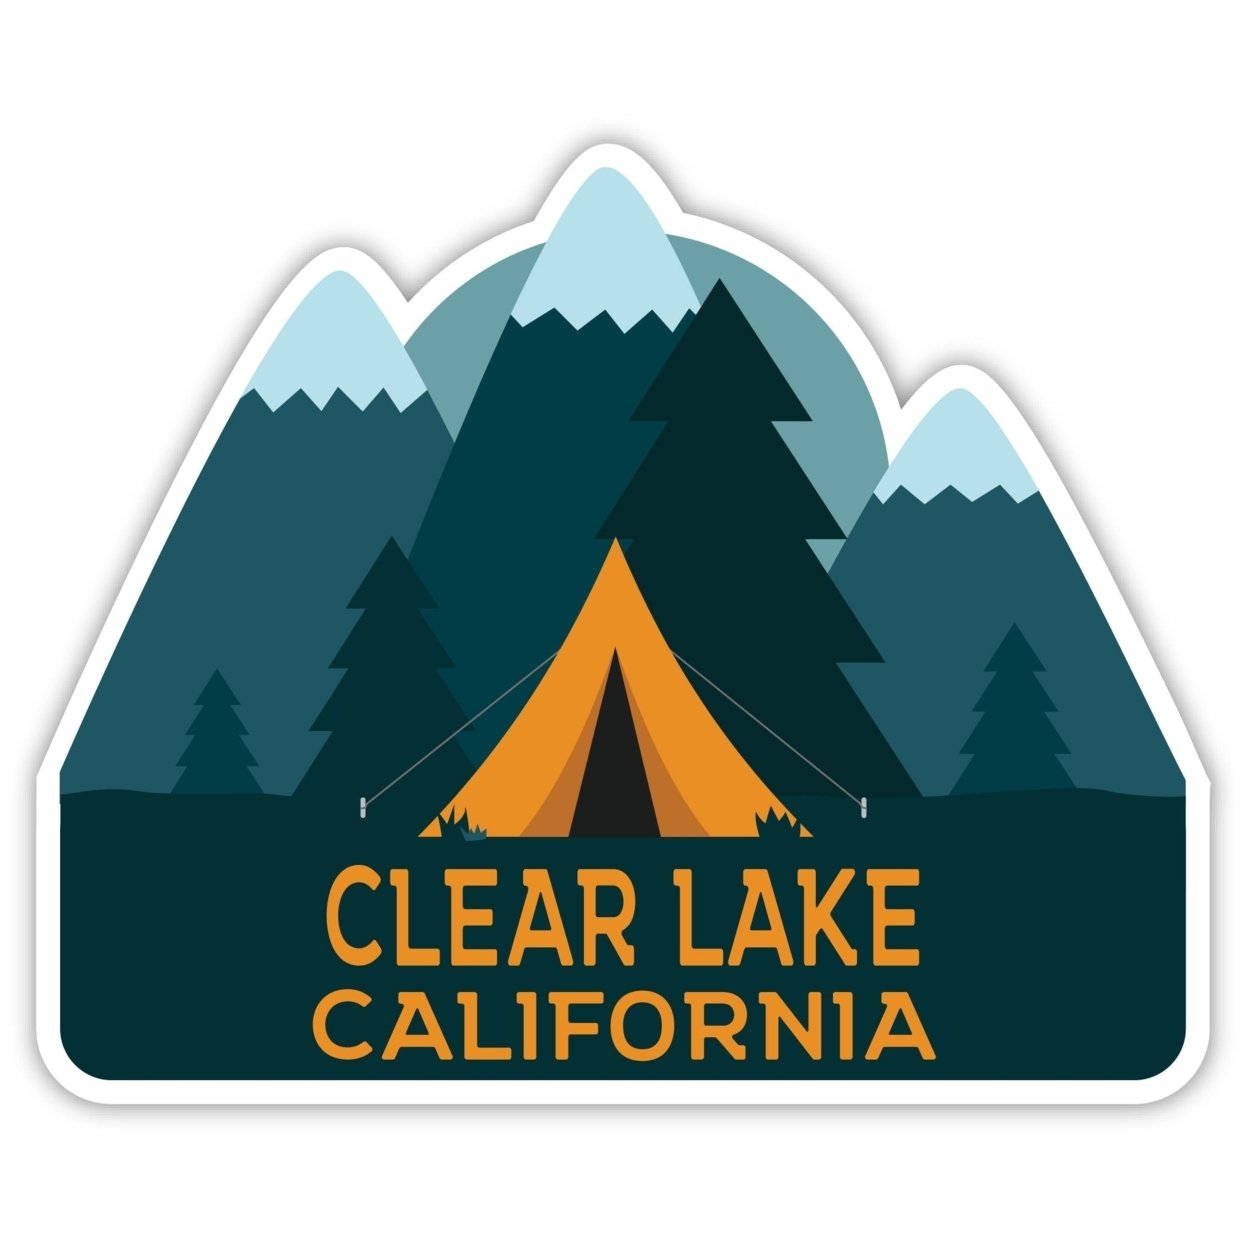 Clear Lake California Souvenir Decorative Stickers (Choose Theme And Size) - 4-Pack, 6-Inch, Tent